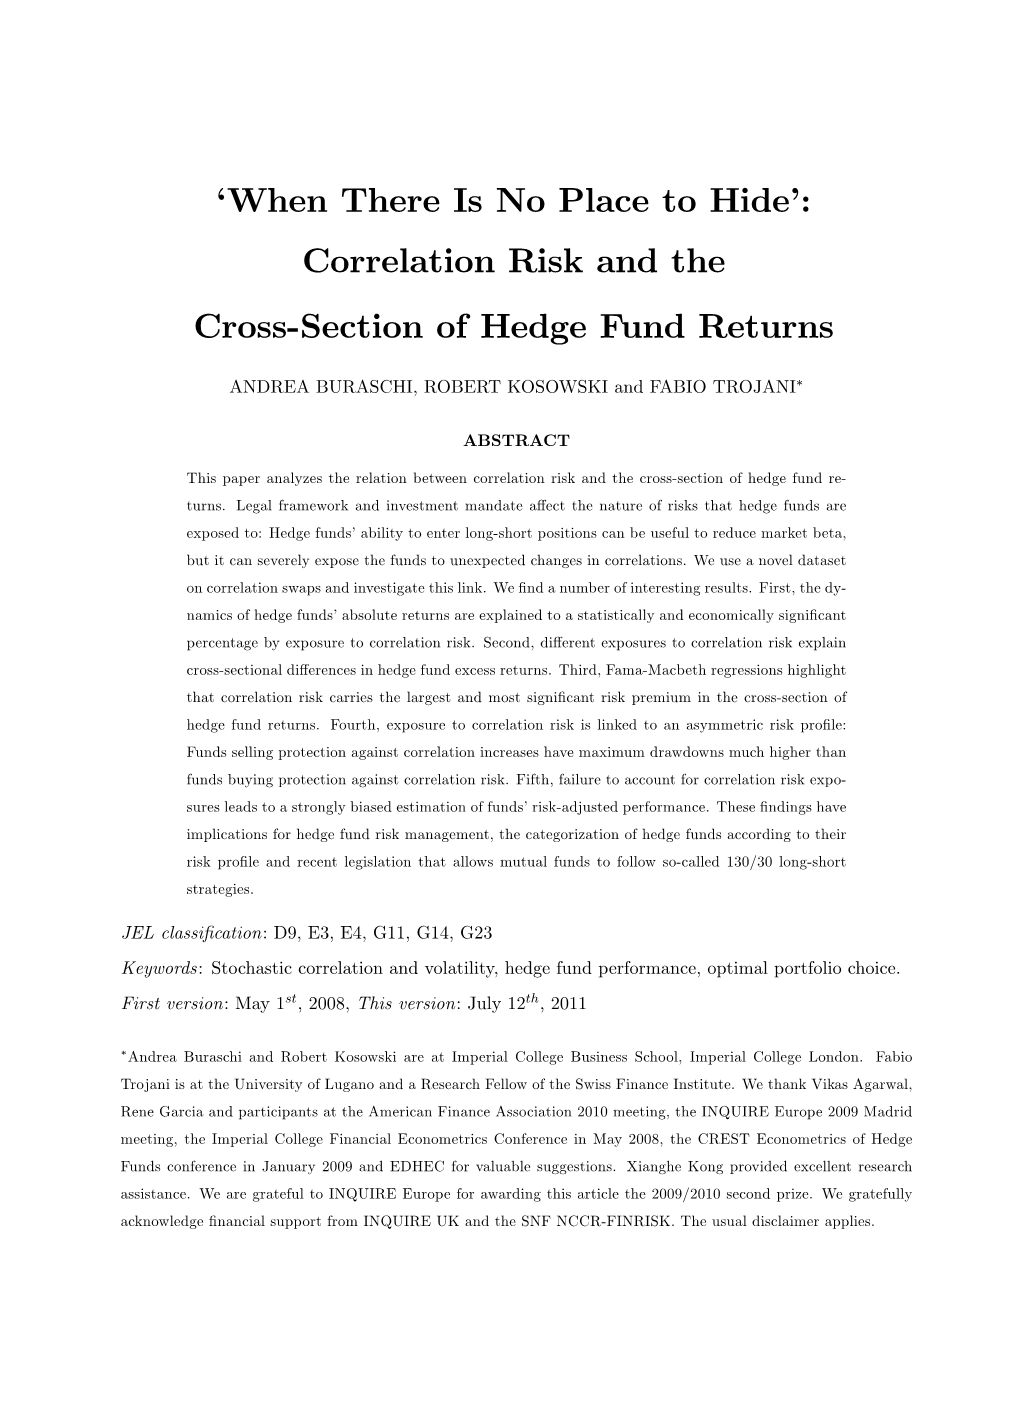 Correlation Risk and the Cross Section of Hedge Fund Returns